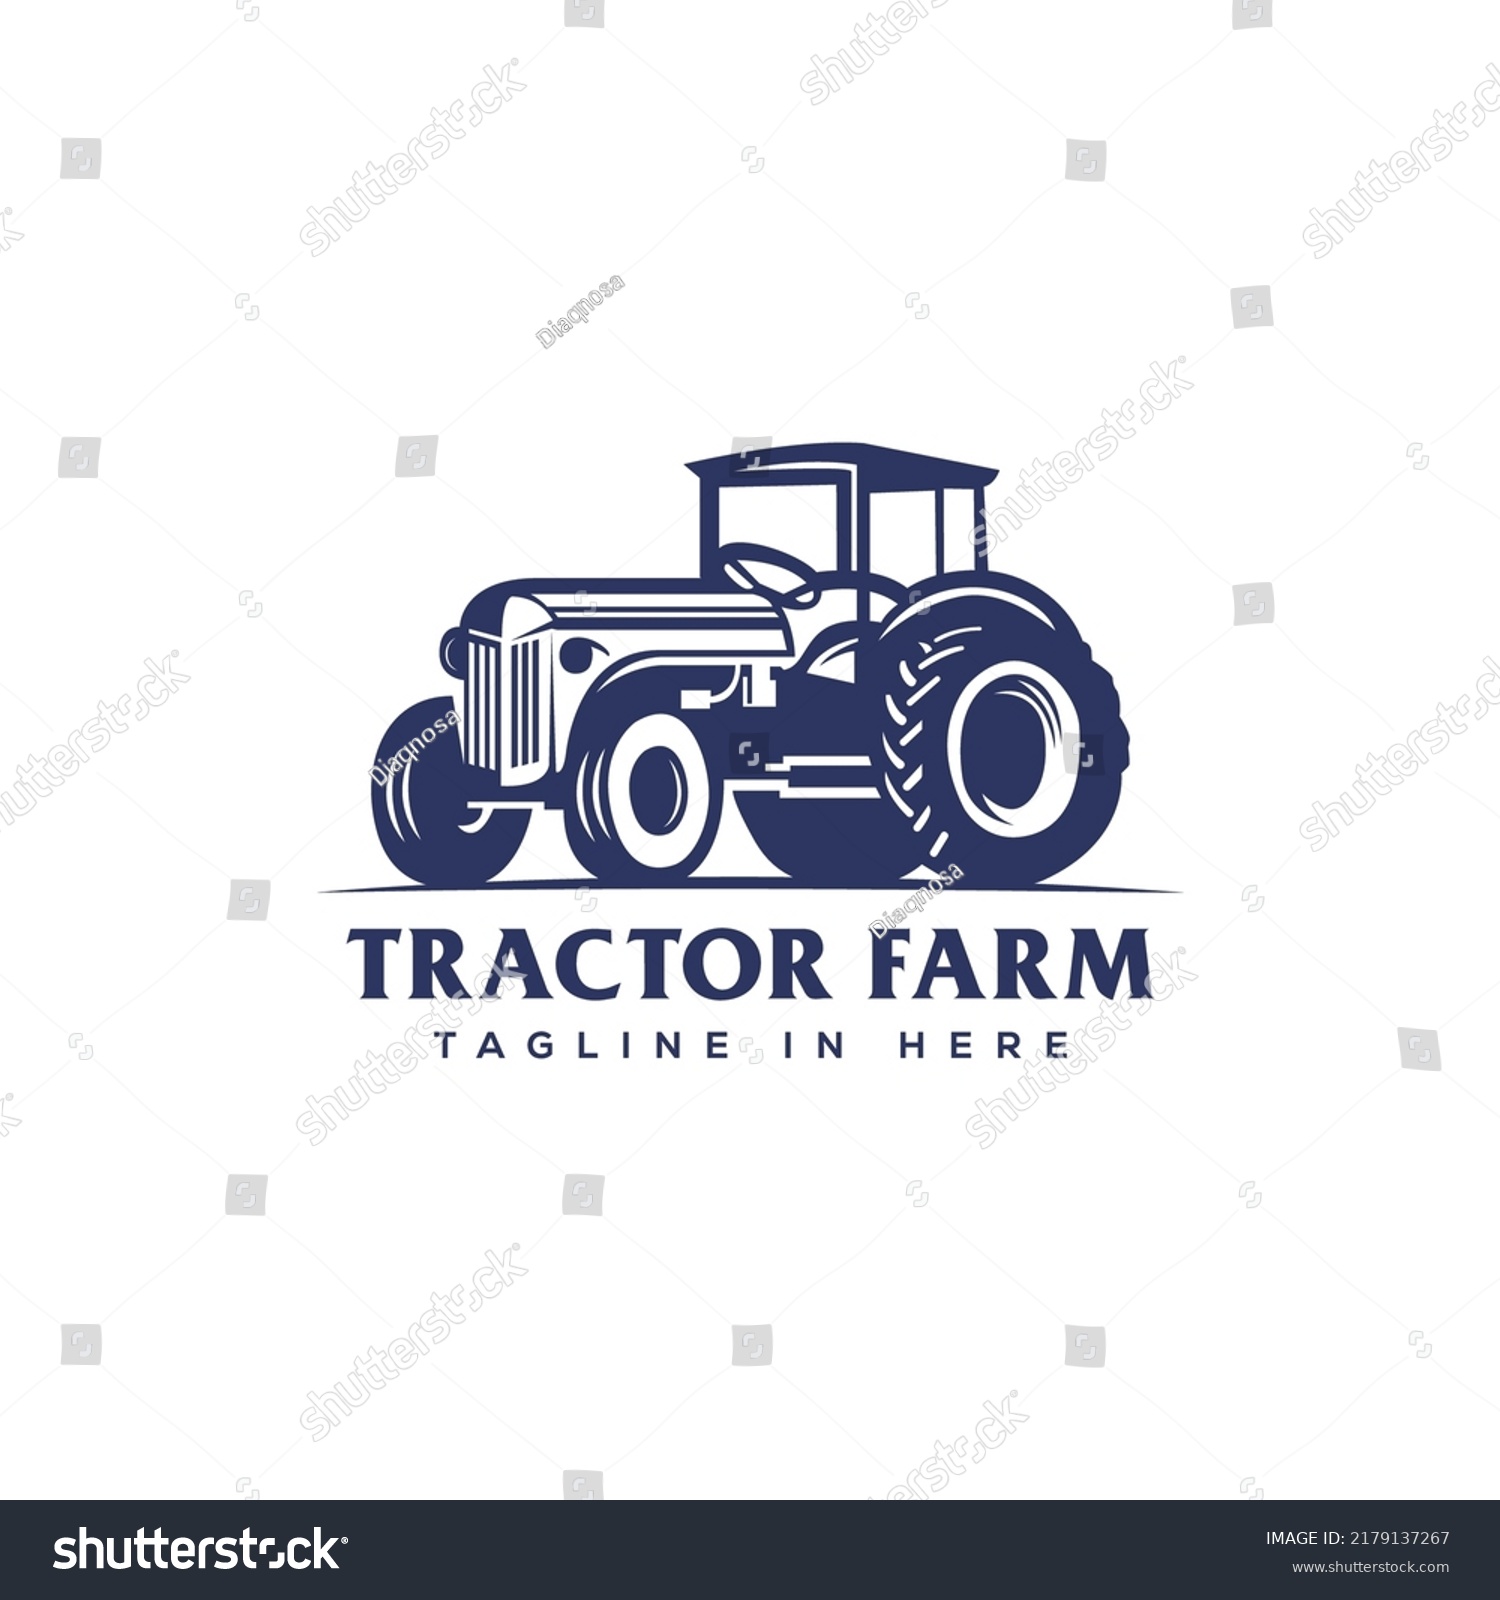 Agriculture Tractor Farm Logo Template Stock Vector (Royalty Free ...